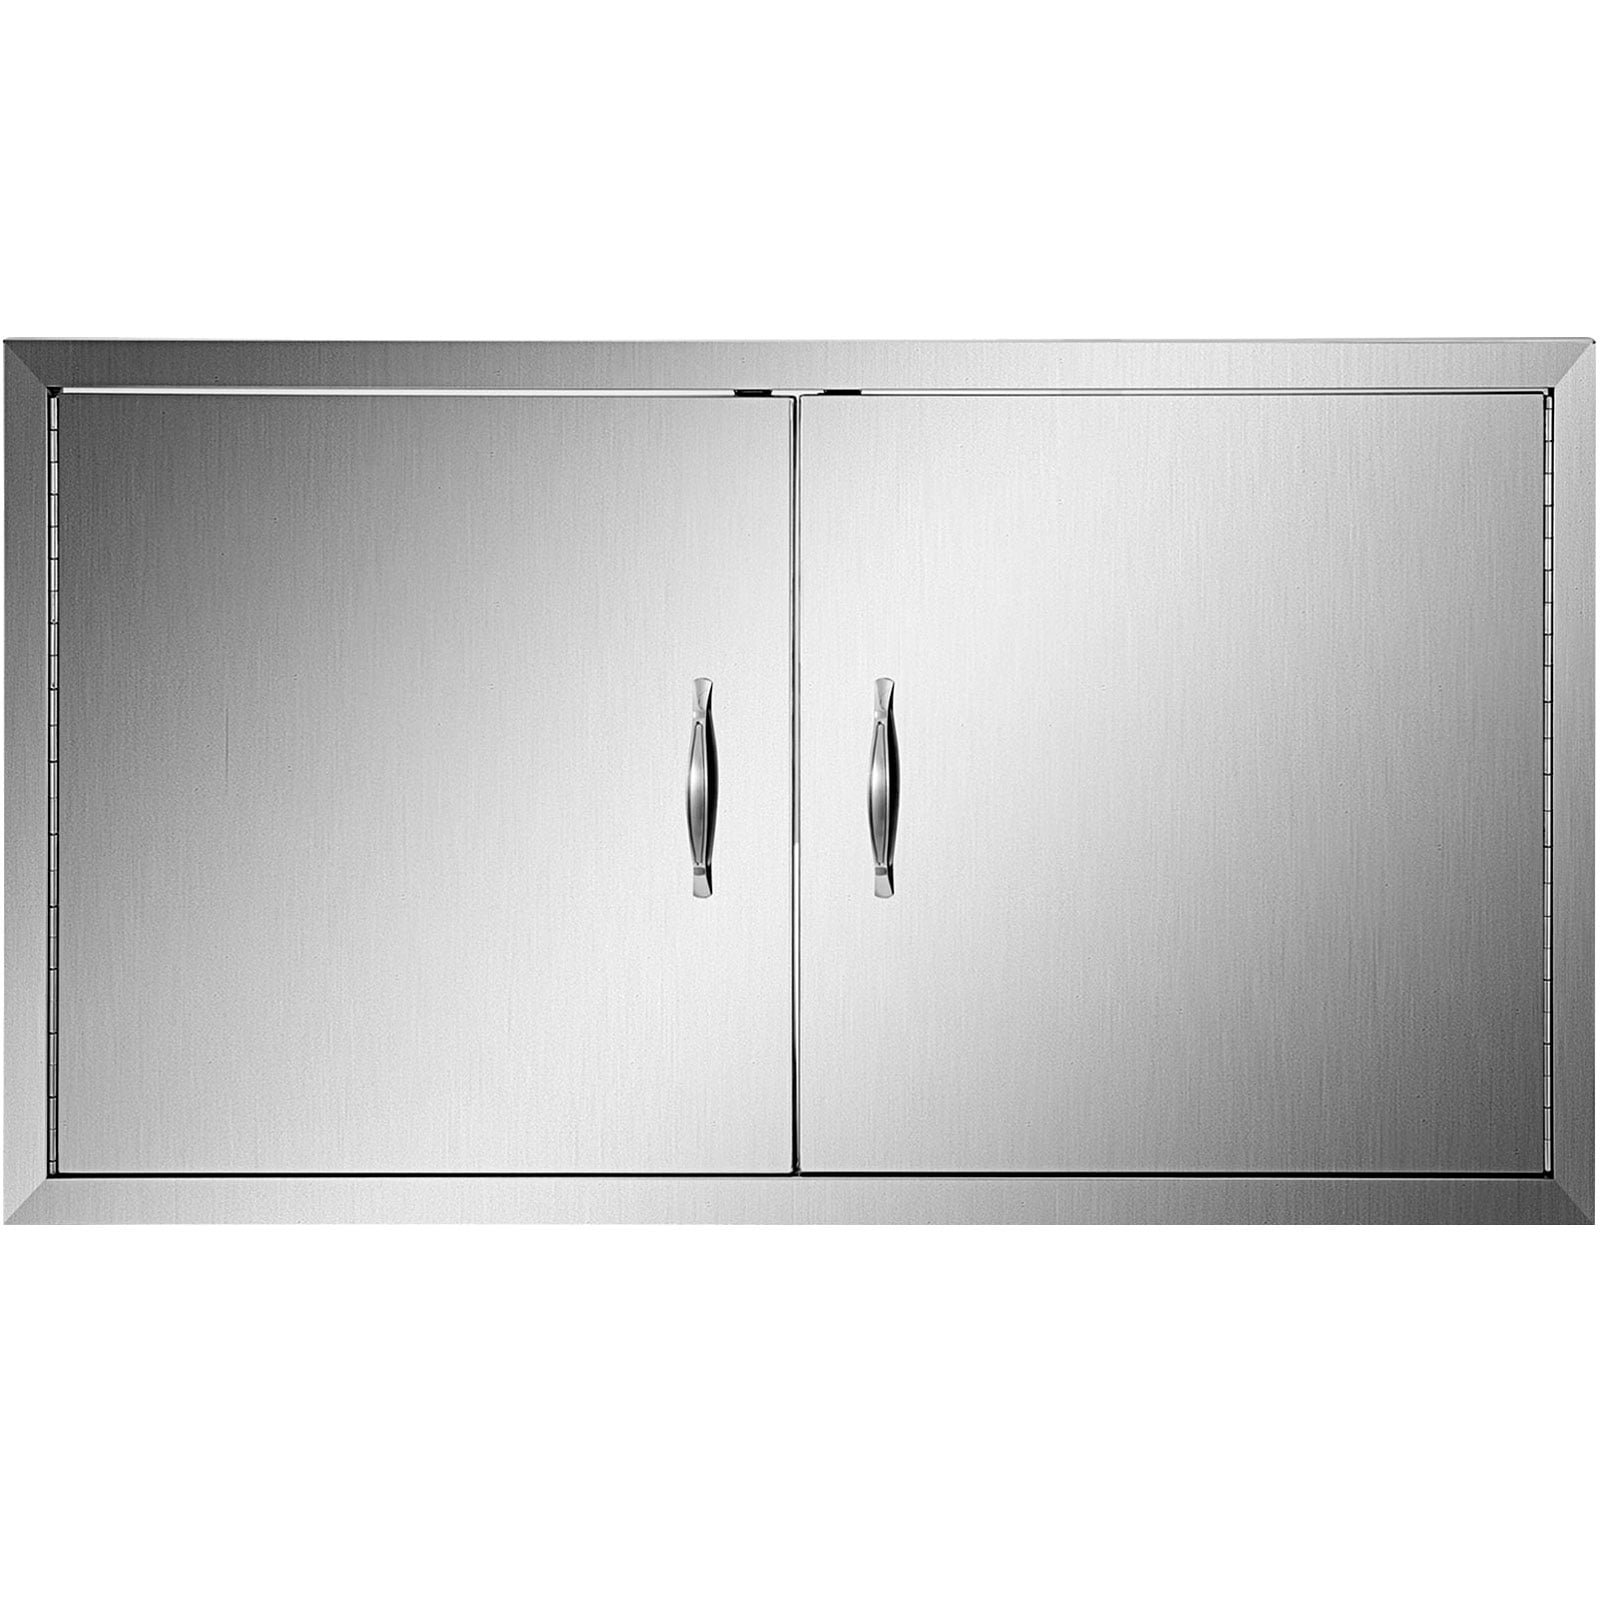 Mophorn BBQ Access Door 42W X 21H Inch Stainless Steel Double BBQ Island Doors Outdoor Kitchen Doors for Commercial BBQ Island Grilling Station